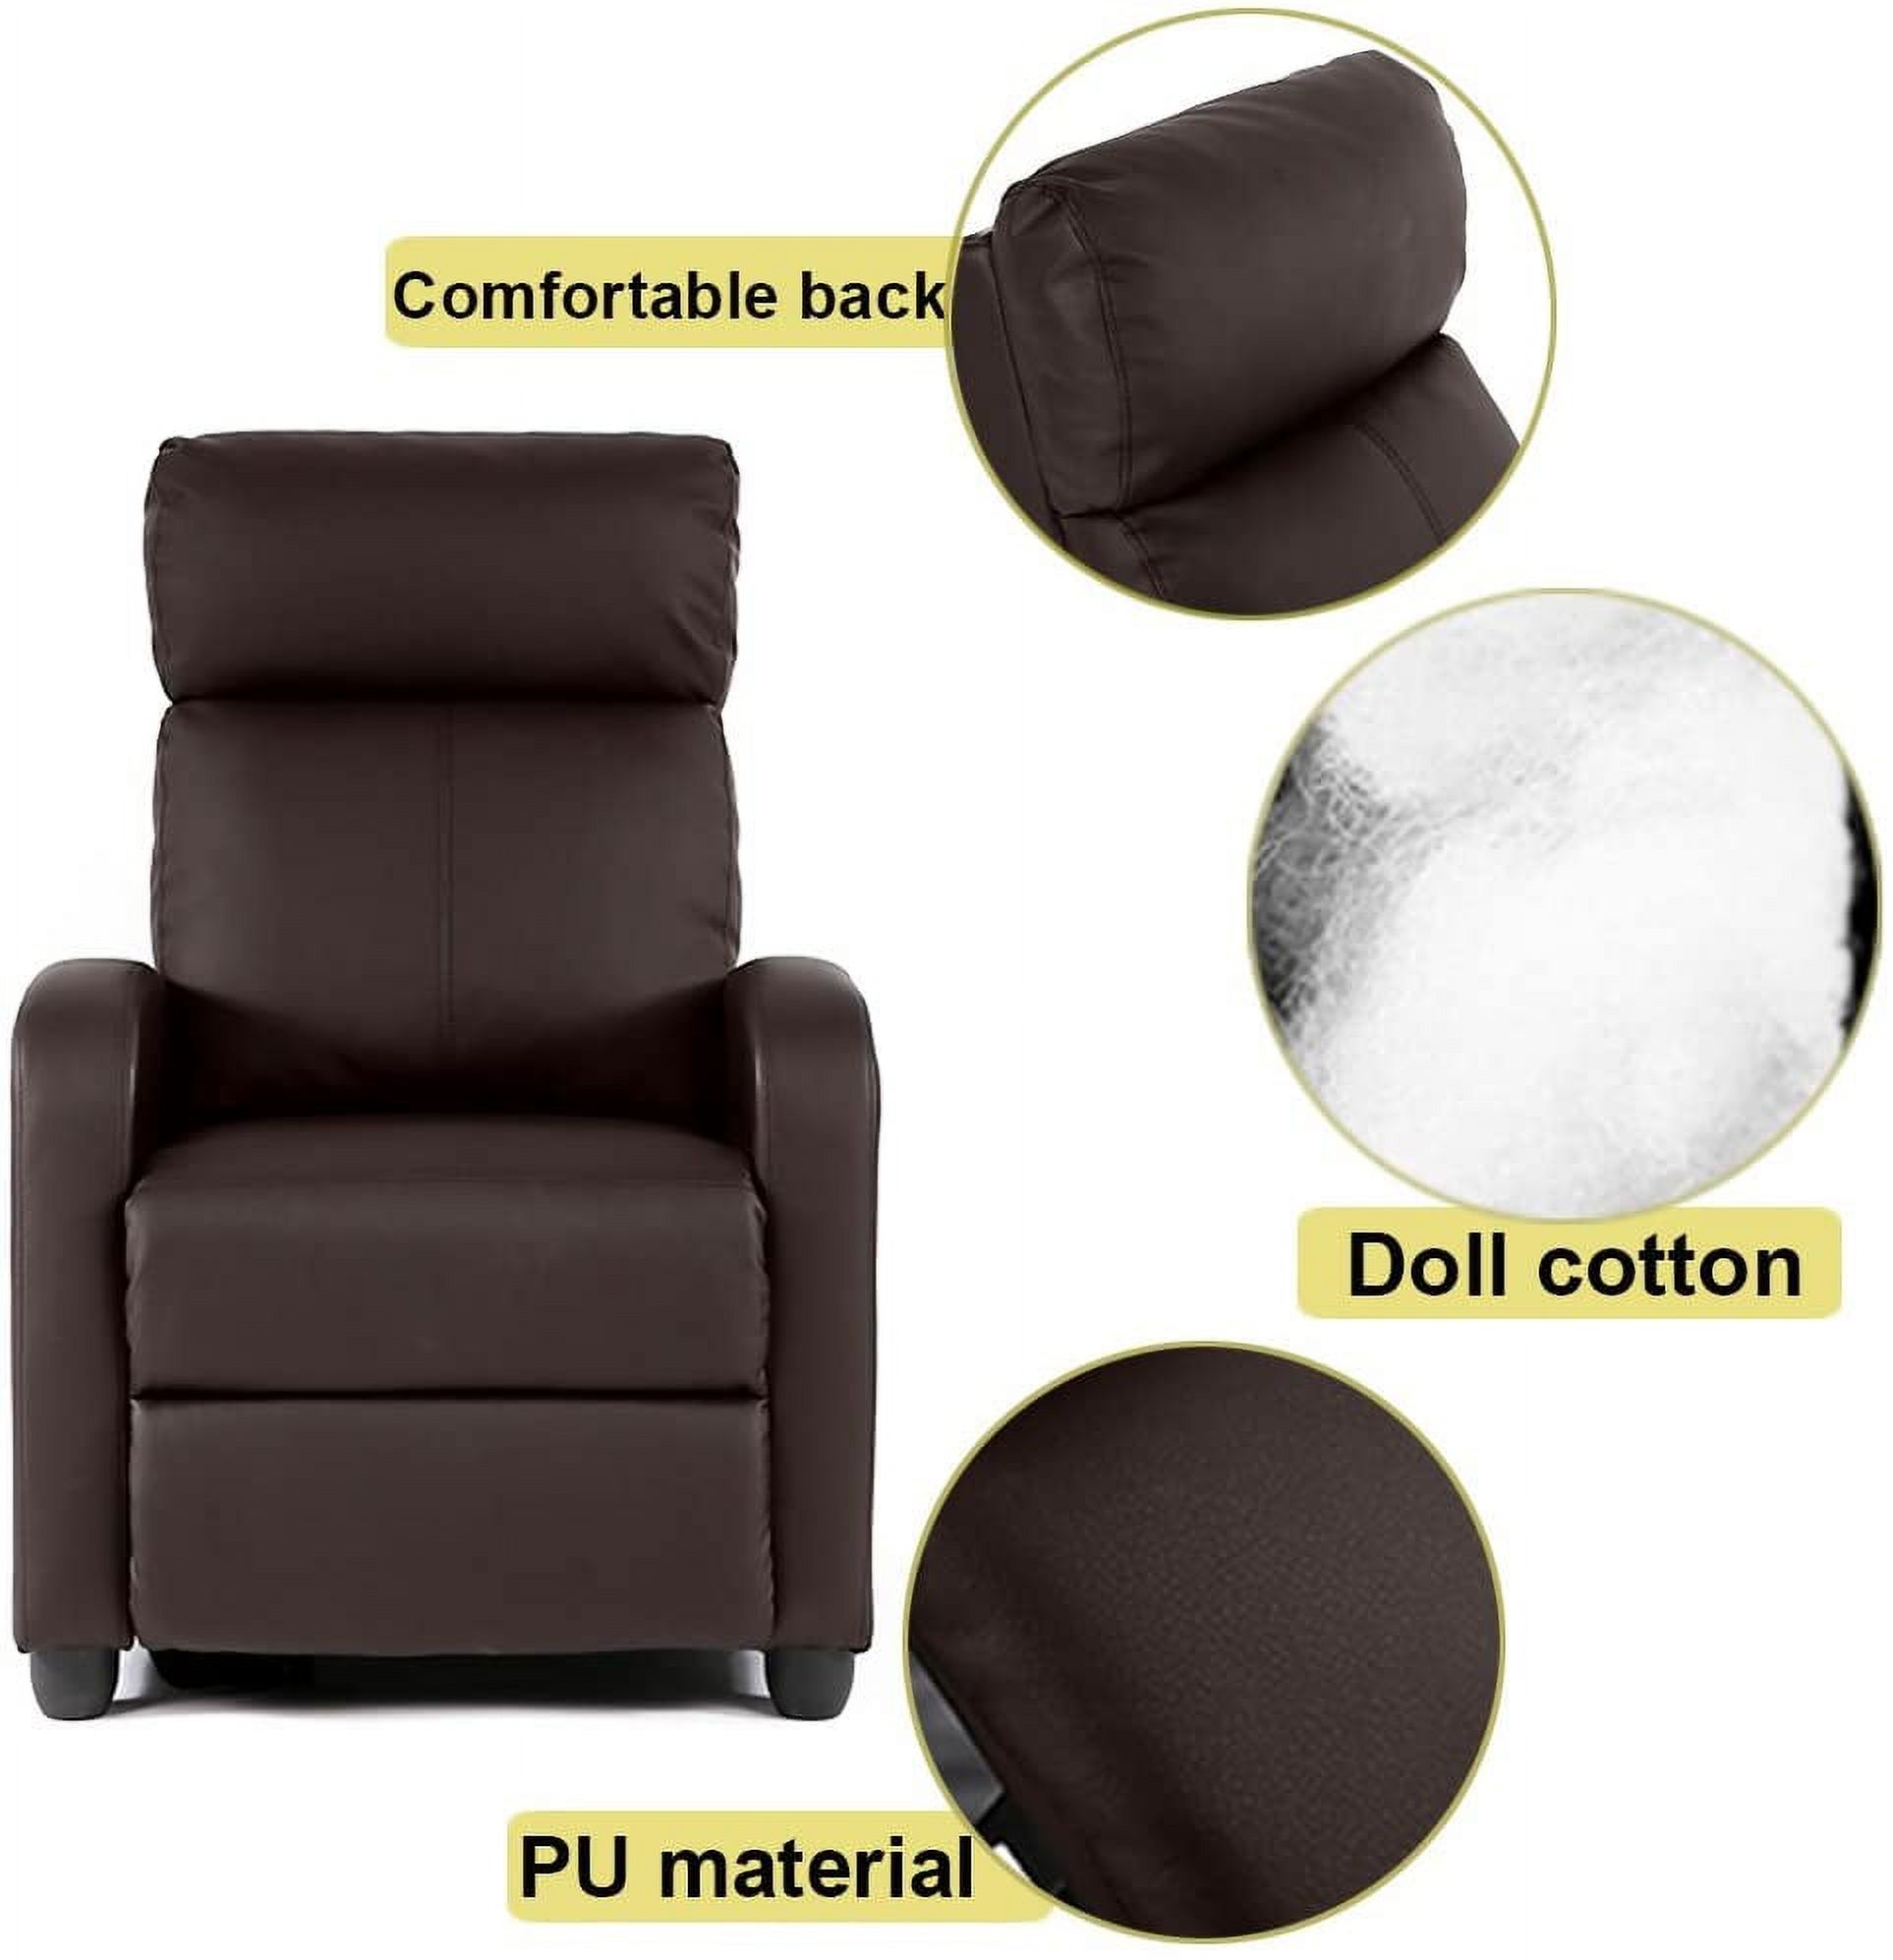 Single Recliner Chair Sofa Furniture Modern Leather Chaise Couch - image 3 of 7